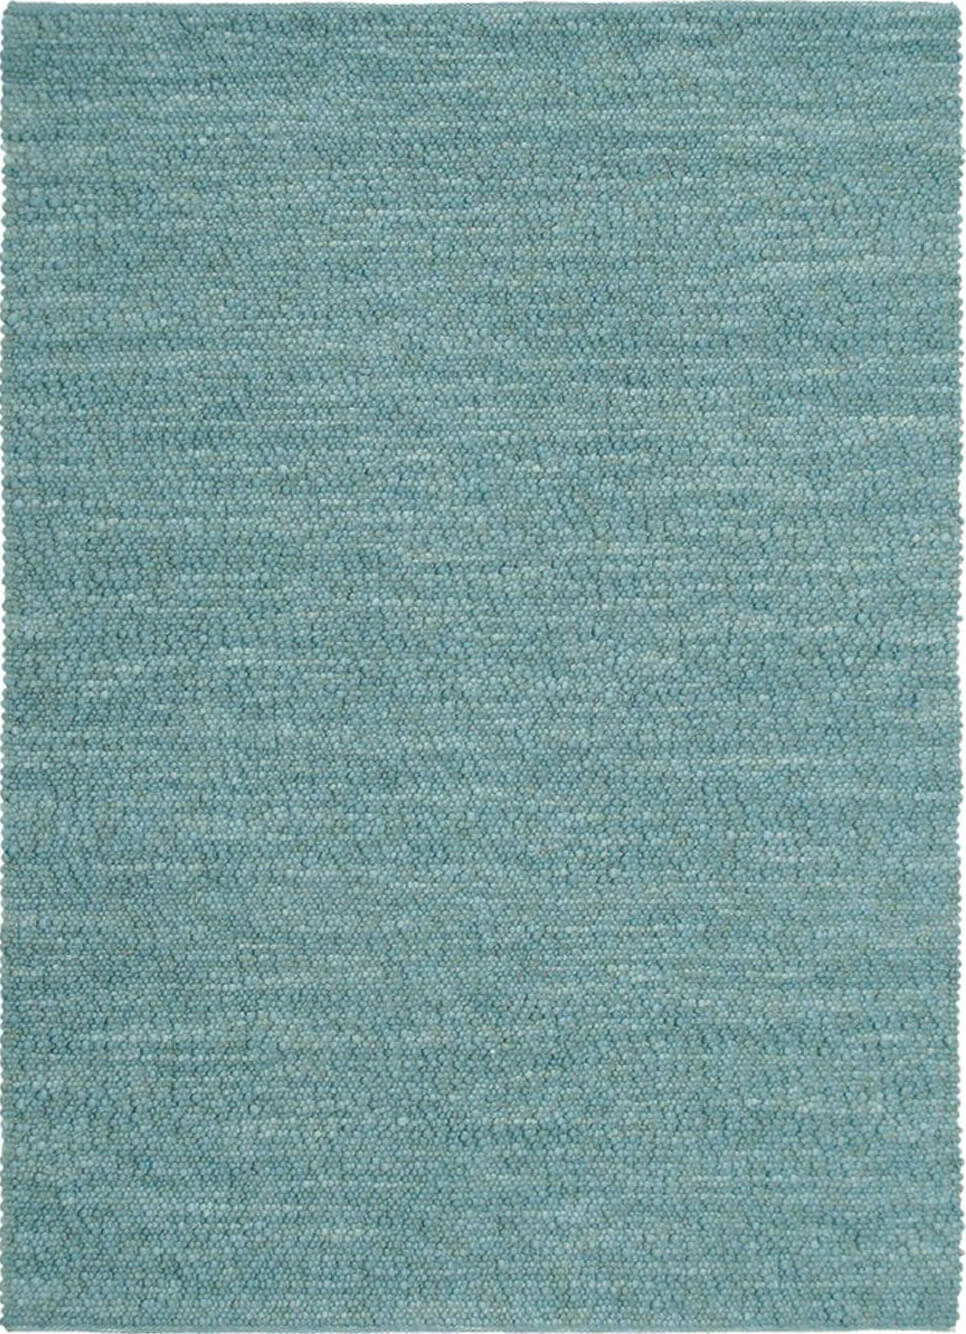 Stubble 29718 Rug by Brink & Campman